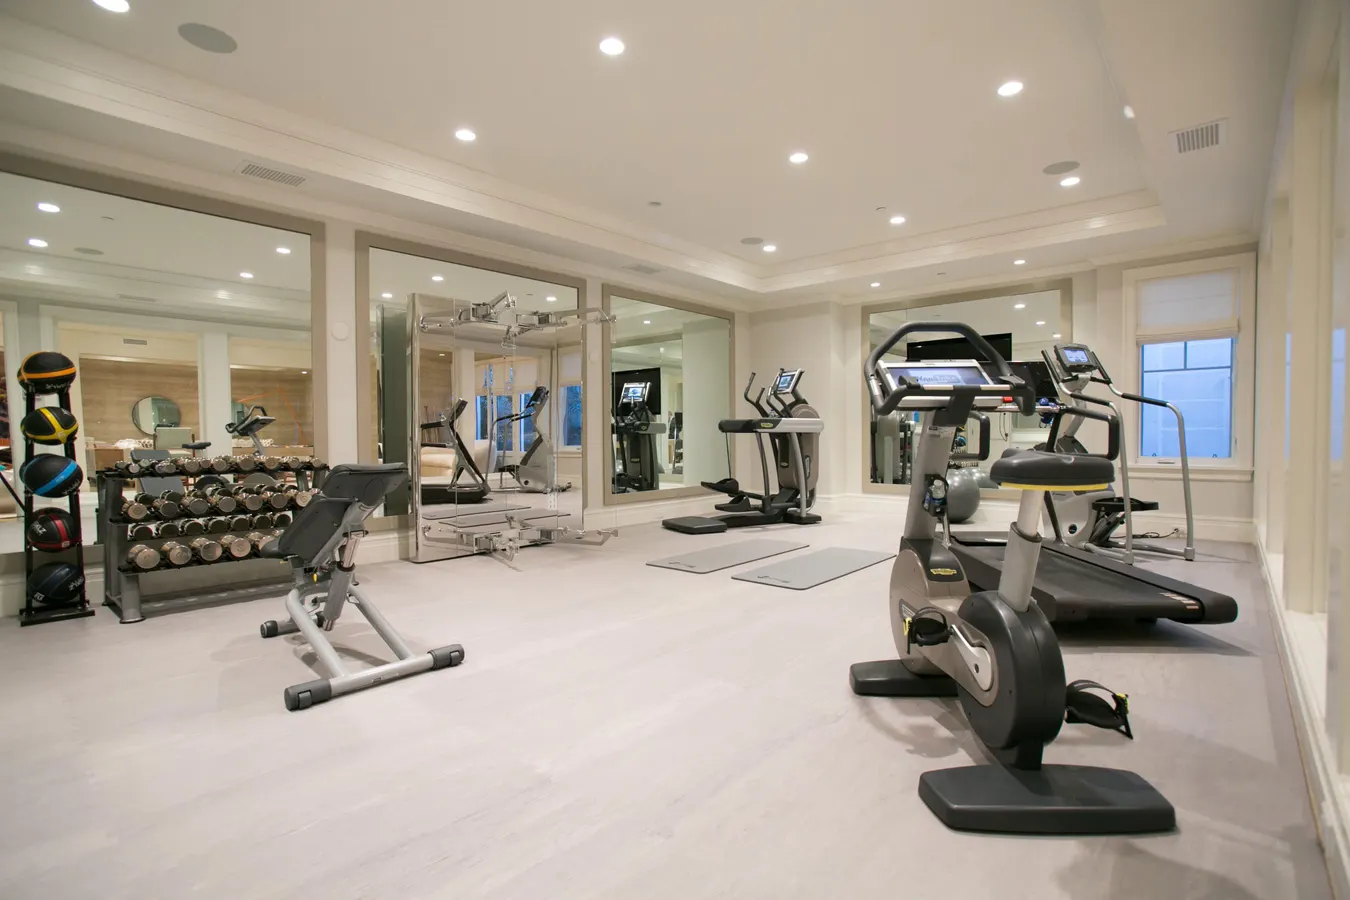 9 Tips For Crafting the Ultimate Luxury Home Gym